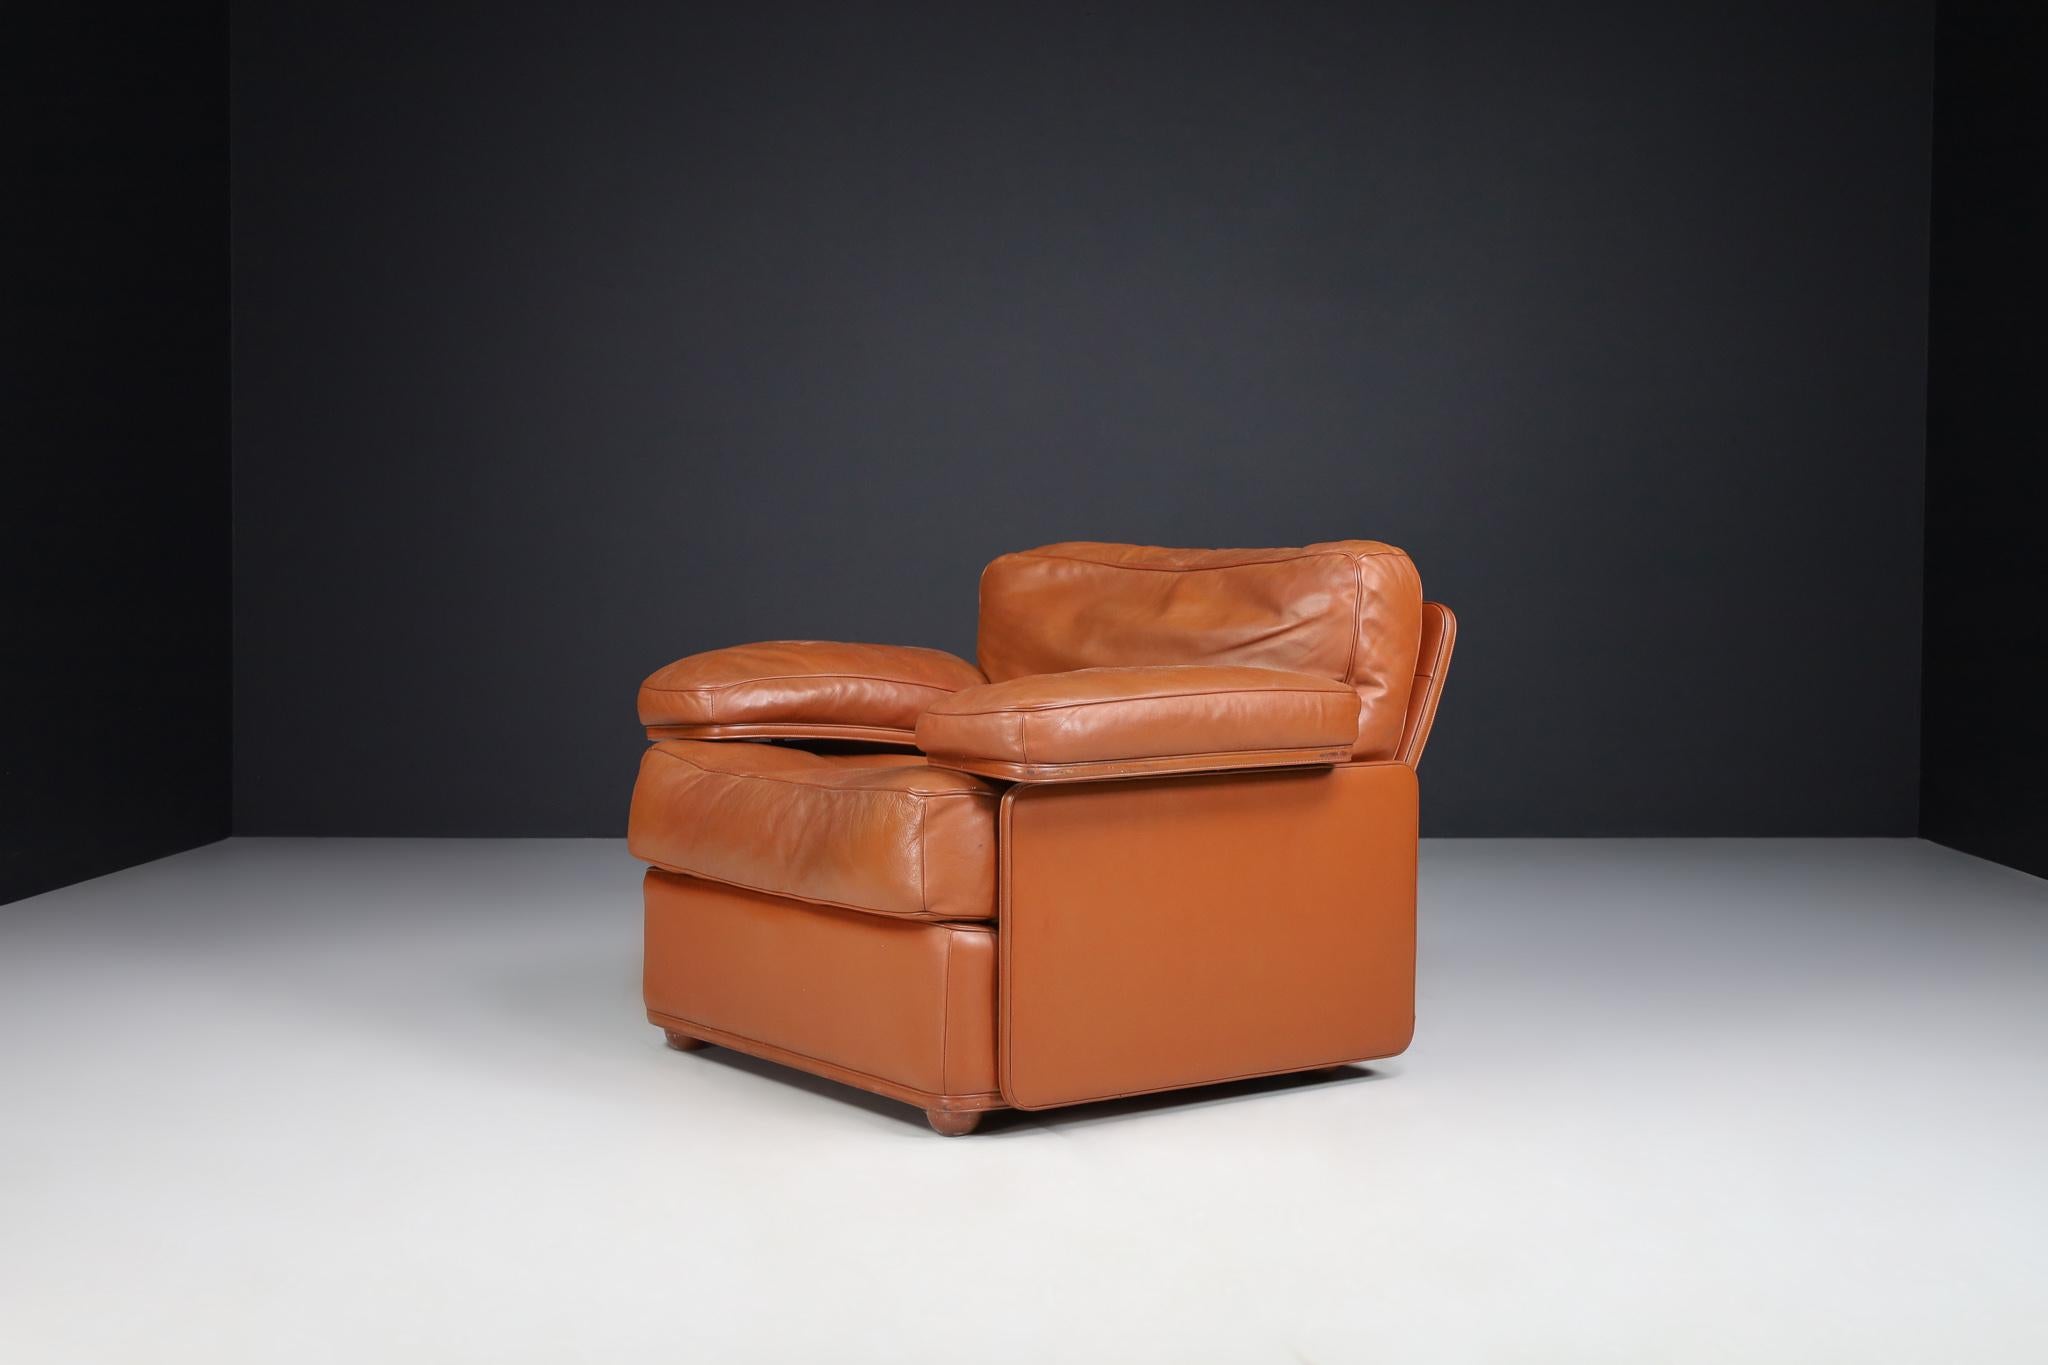 Late 20th Century Tito Agnoli For Poltrona Frau Leather Lounge Chairs by, Italy 1970s For Sale